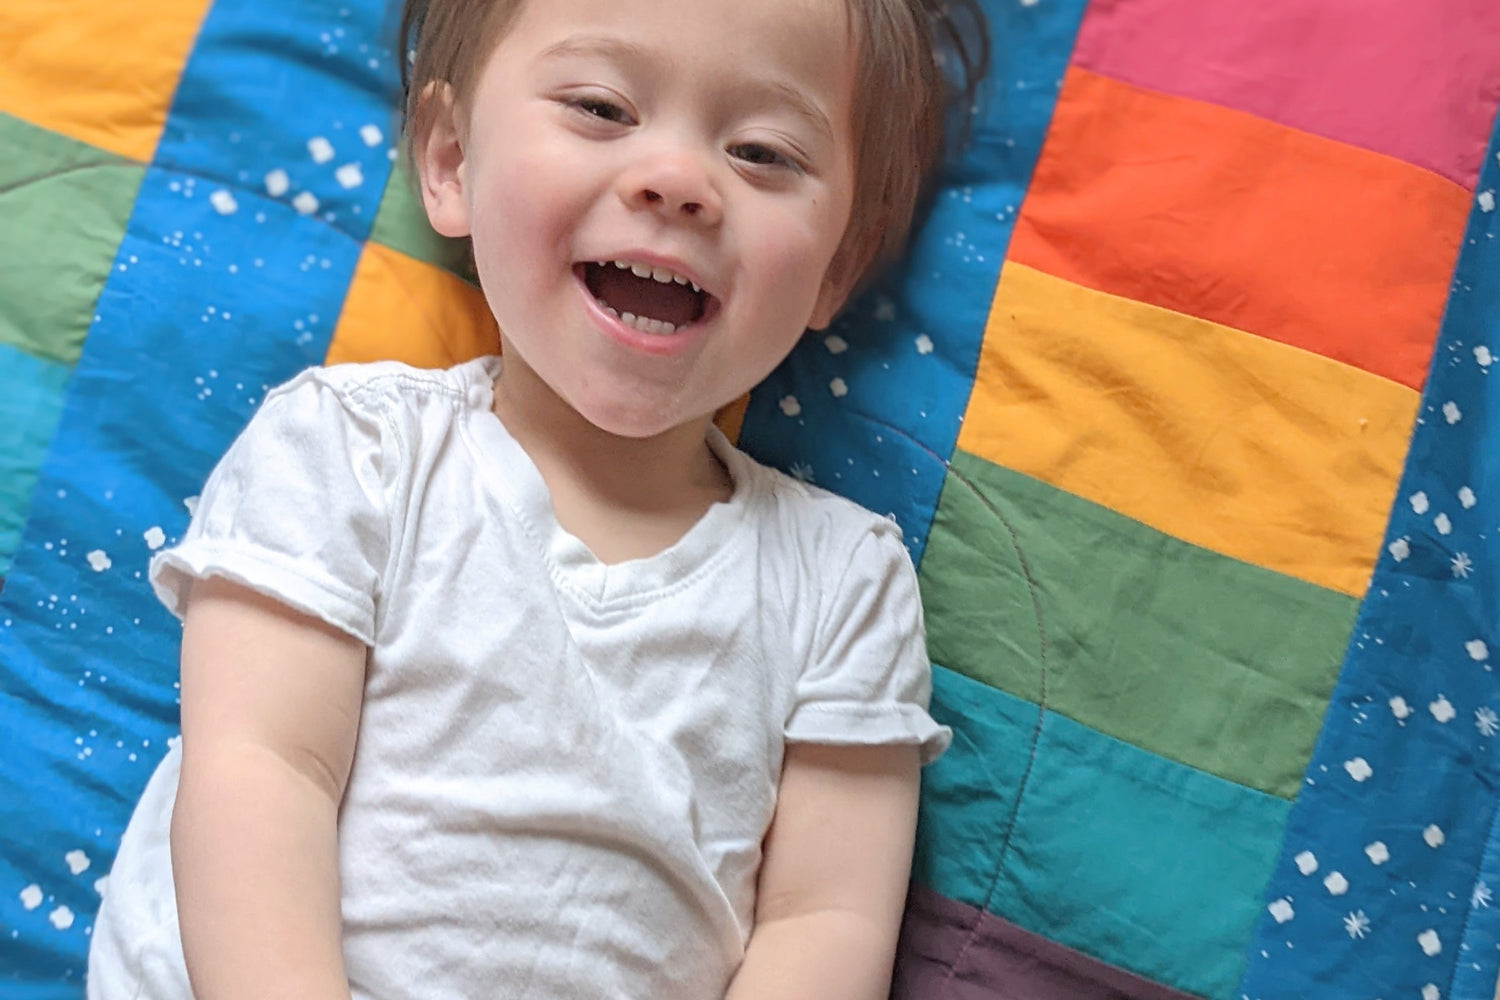 Baby Peipei, Bold Rainbow on Cloudy Blue background. Shot from above, a toddler smiles lying on a handmade organic quilt with rainbow stripes